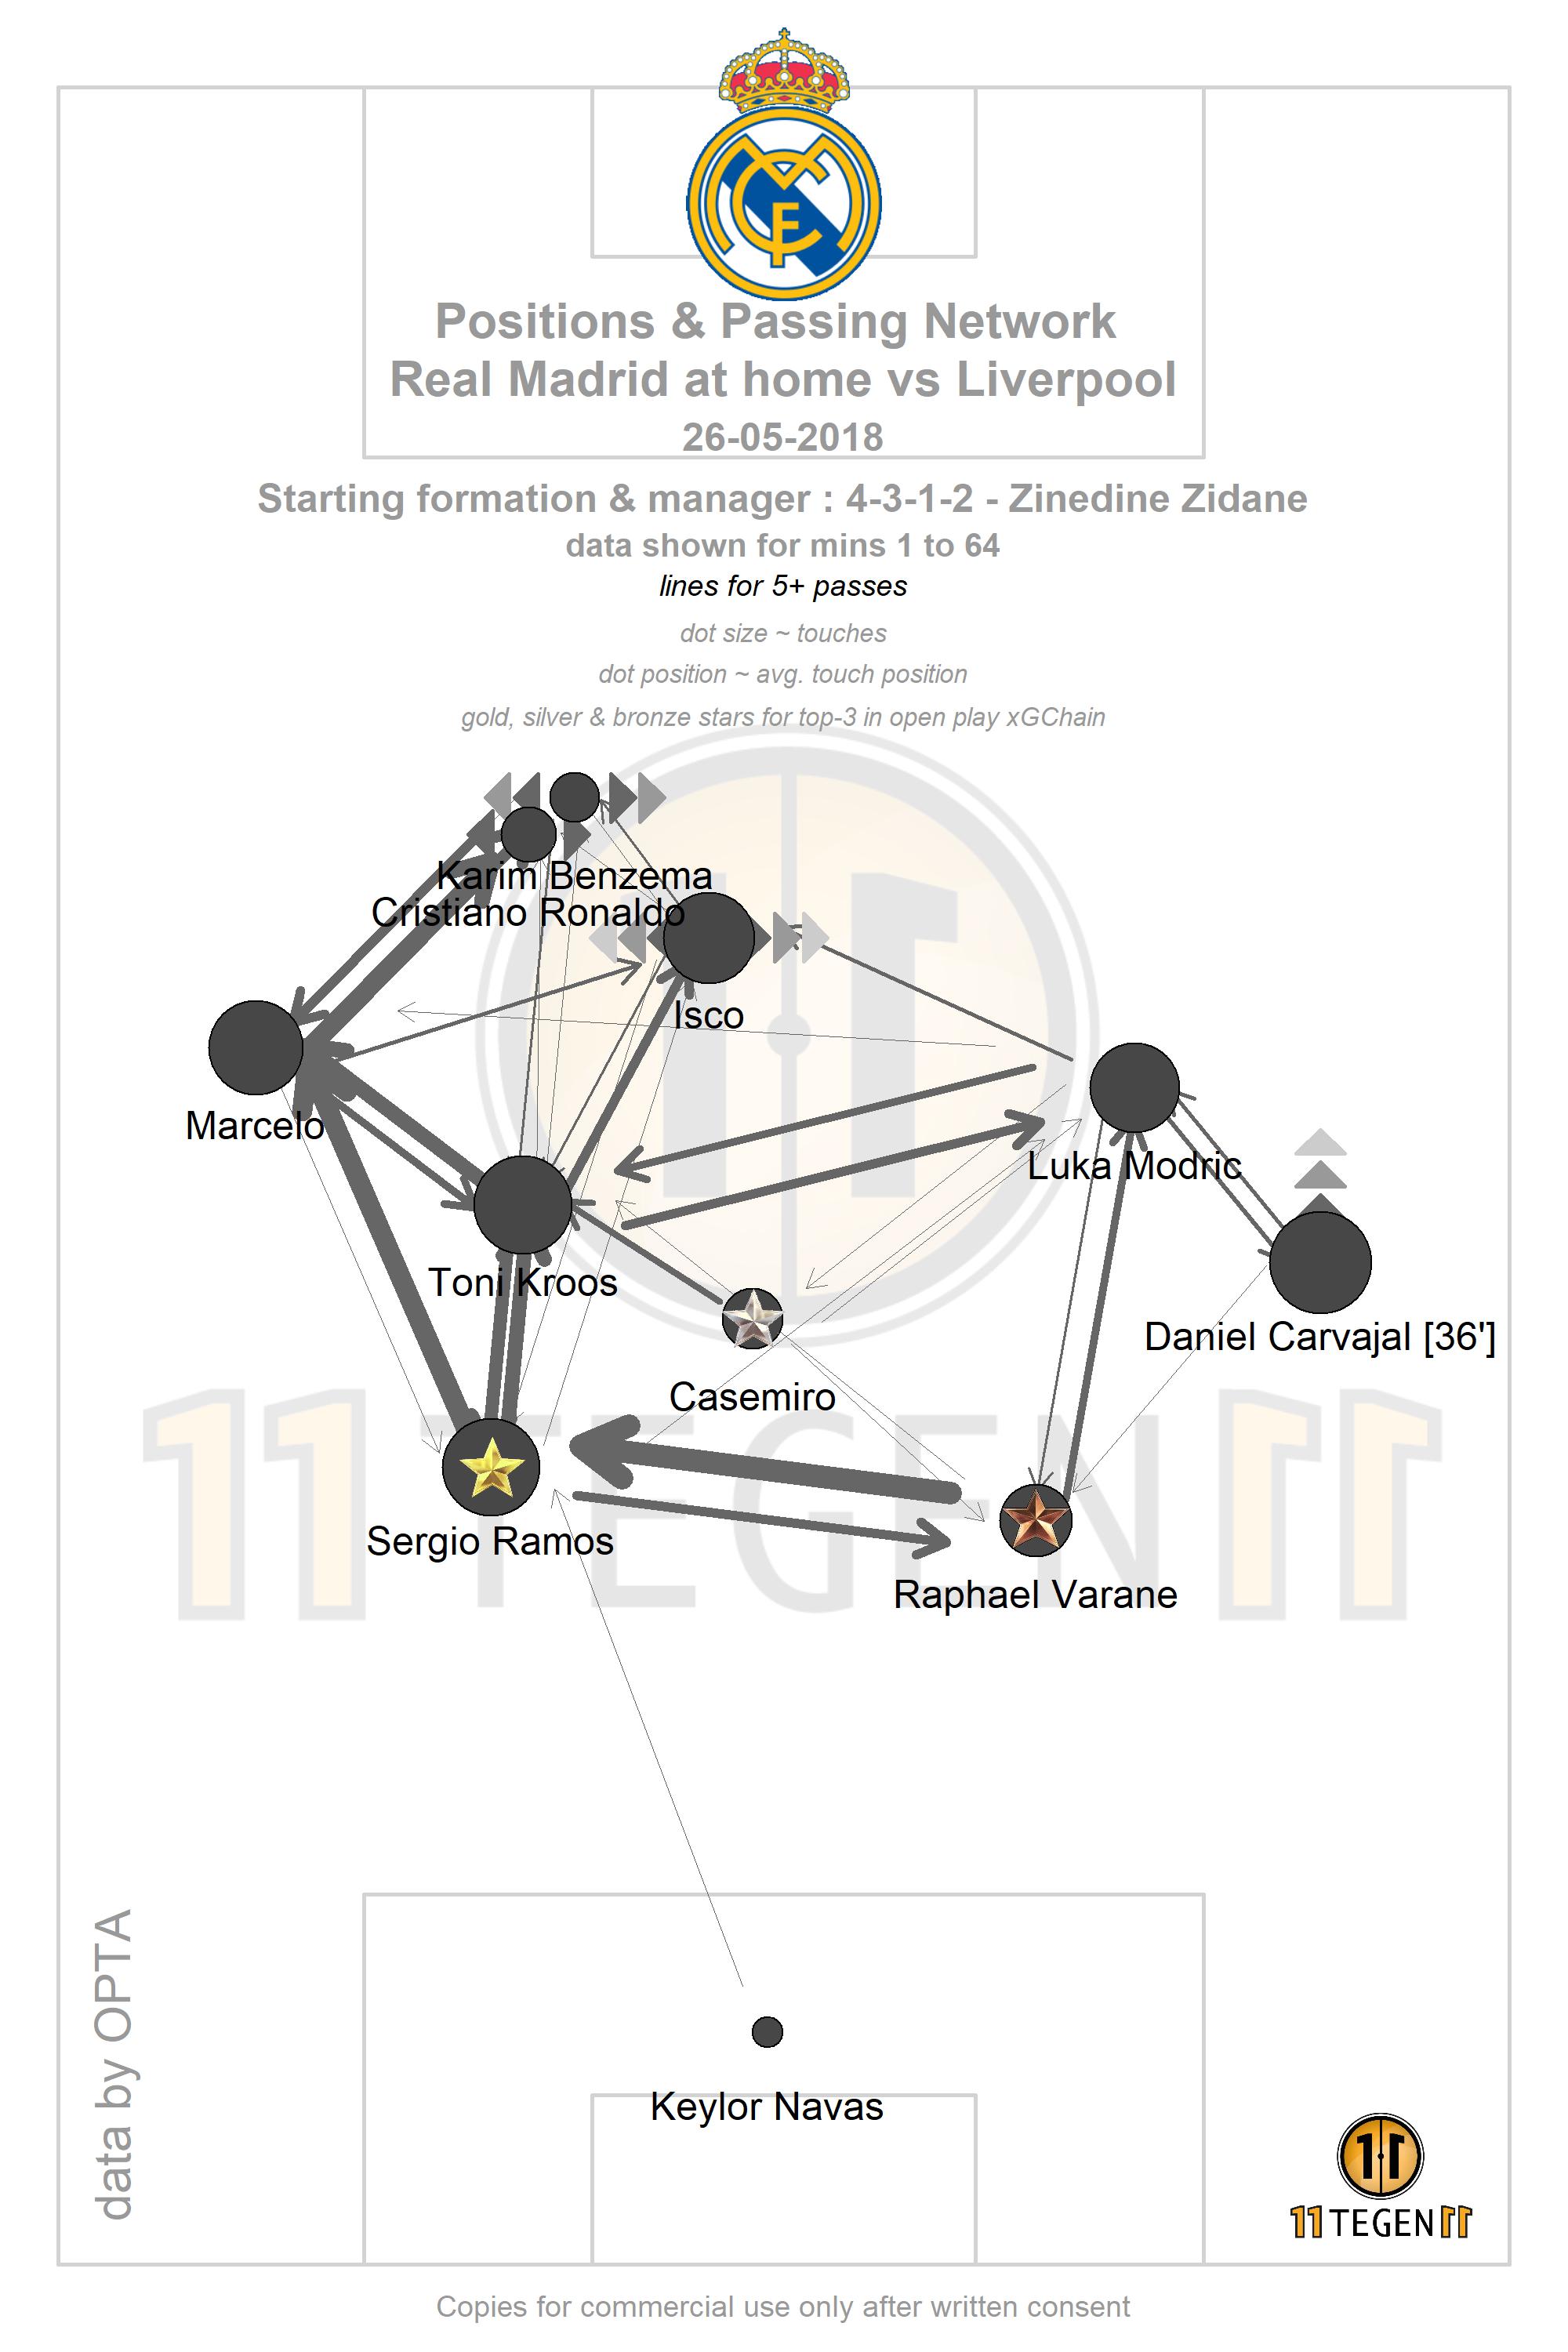 11tegen11 Madrid S Passmap Illustrates Their Left Wing Heavy Game Plan Within The 4 4 2 Diamond Formation Chances Came Through Build Up From The Back Rather Than From High Turnovers T Co D7eiixxxqn Twitter